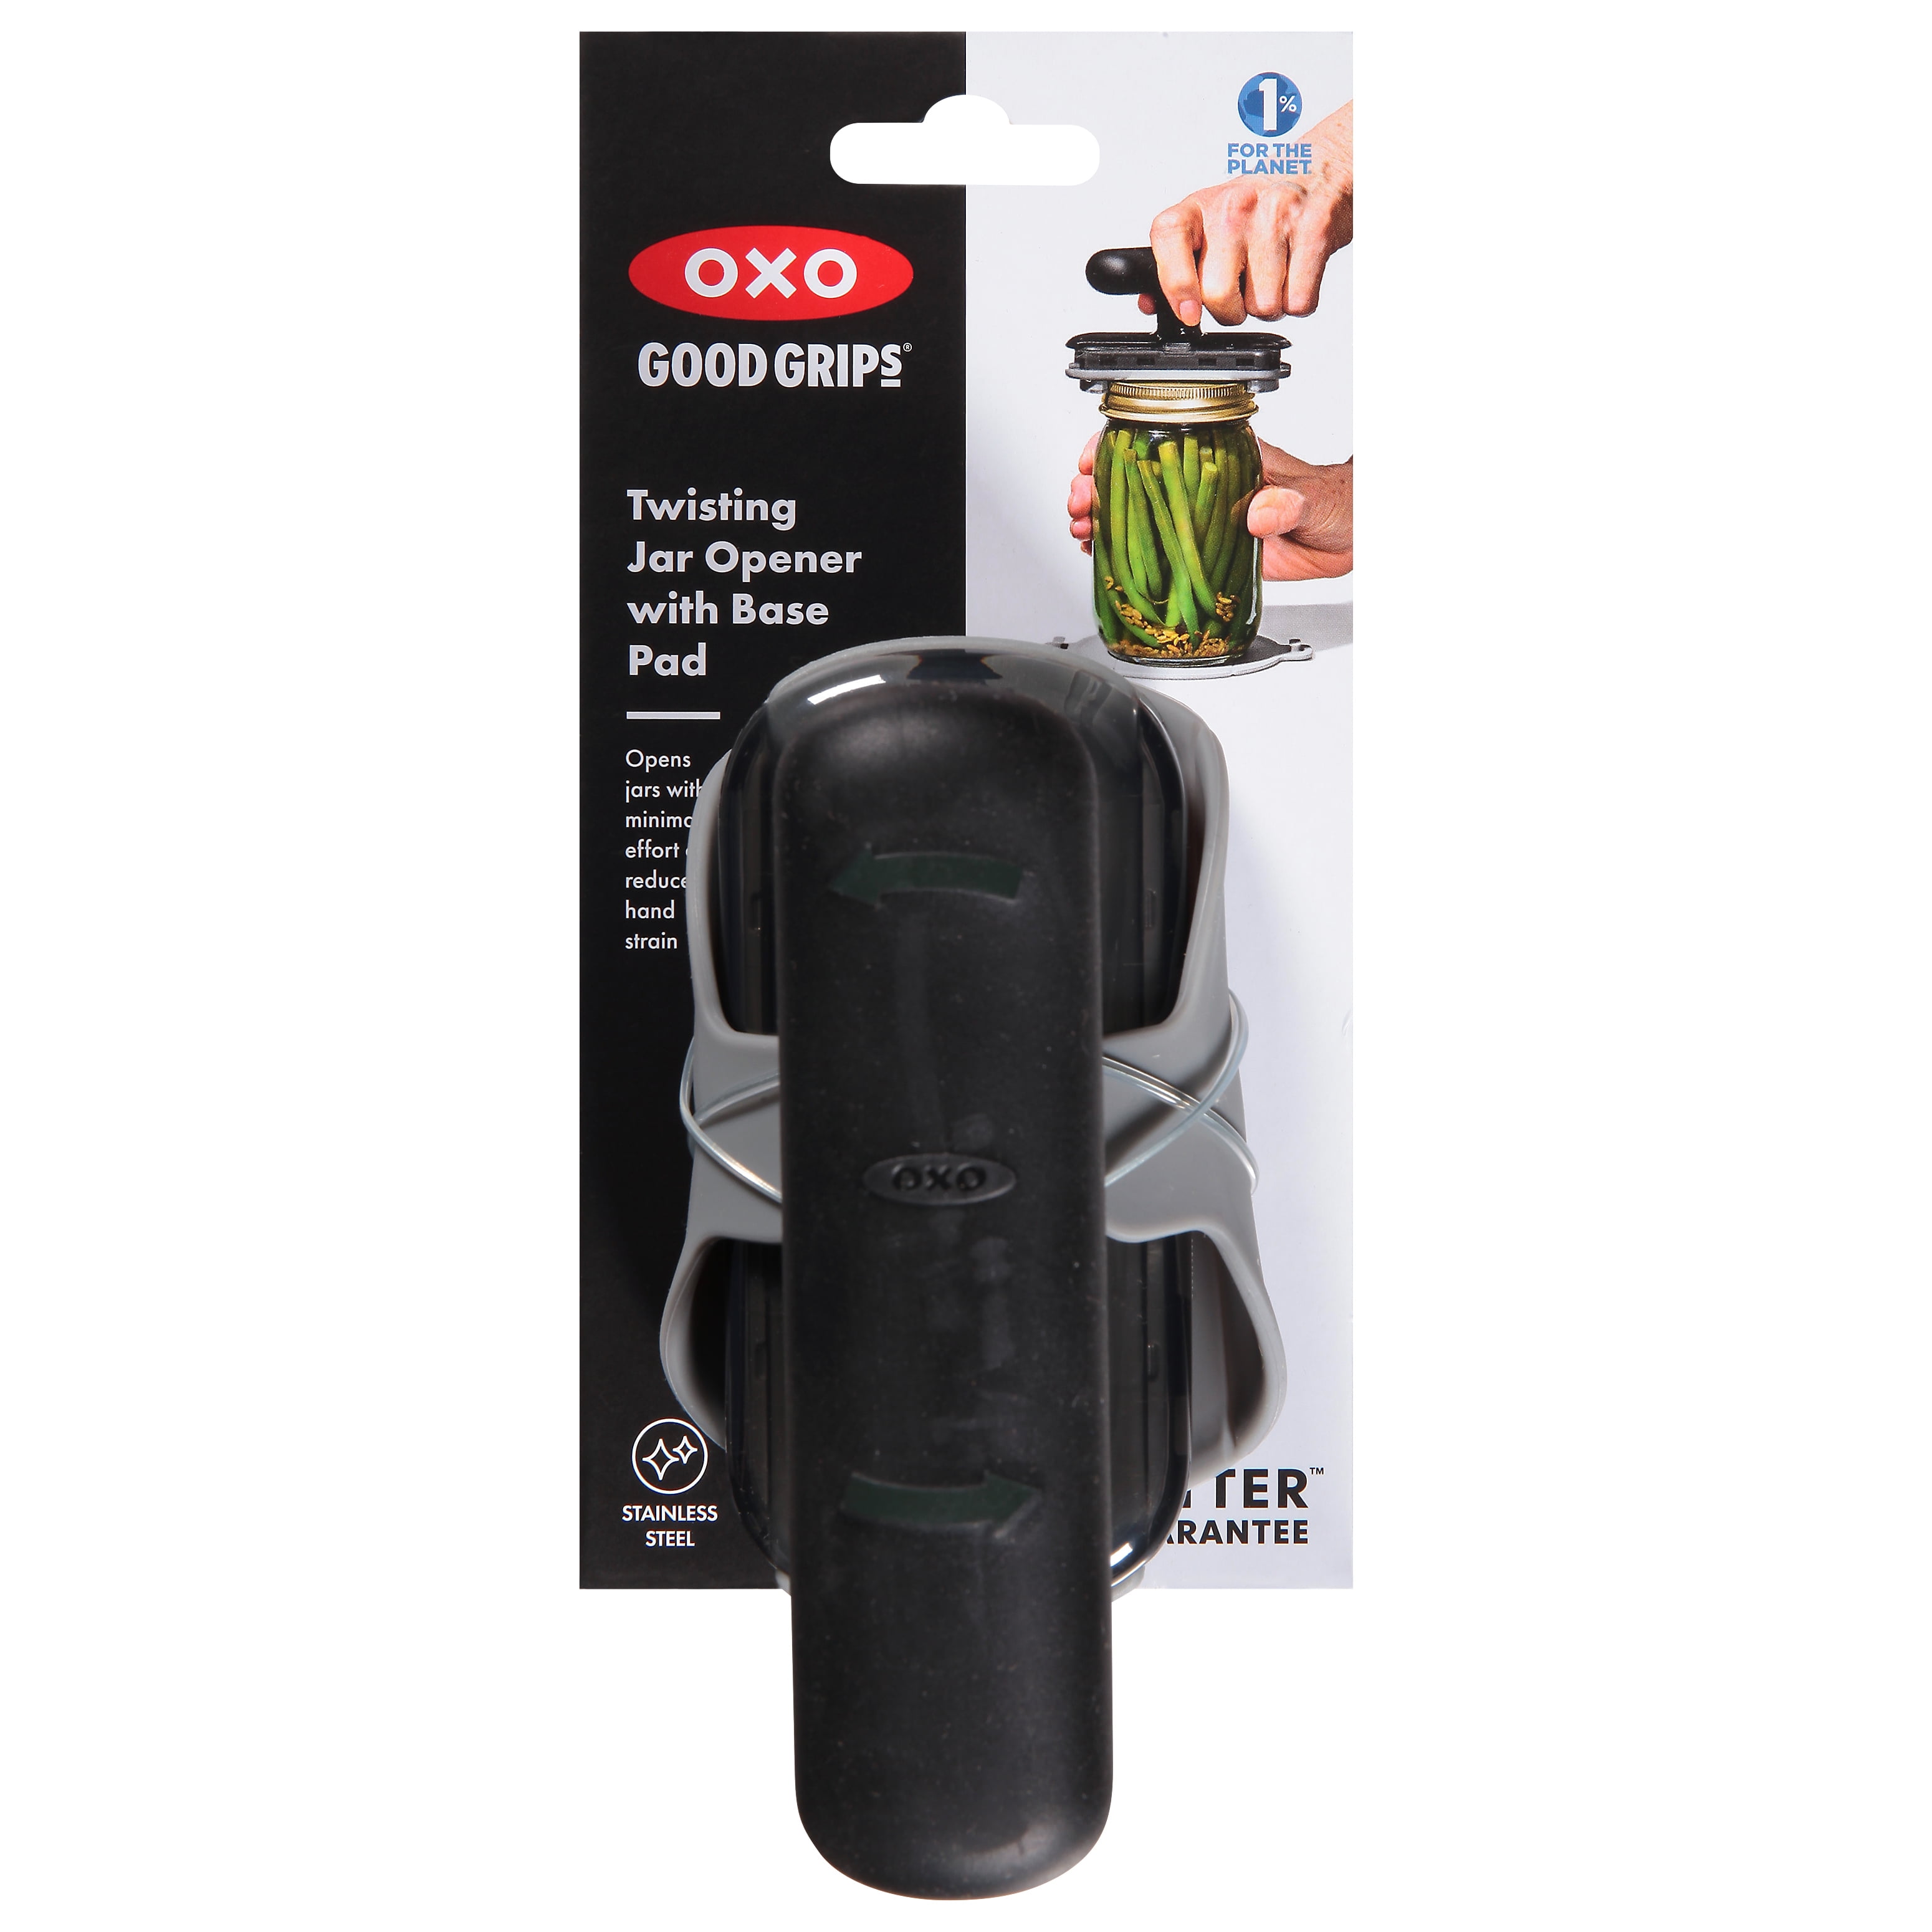  OXO Good Grips Twisting Jar Opener with Basepad, Black : Home &  Kitchen